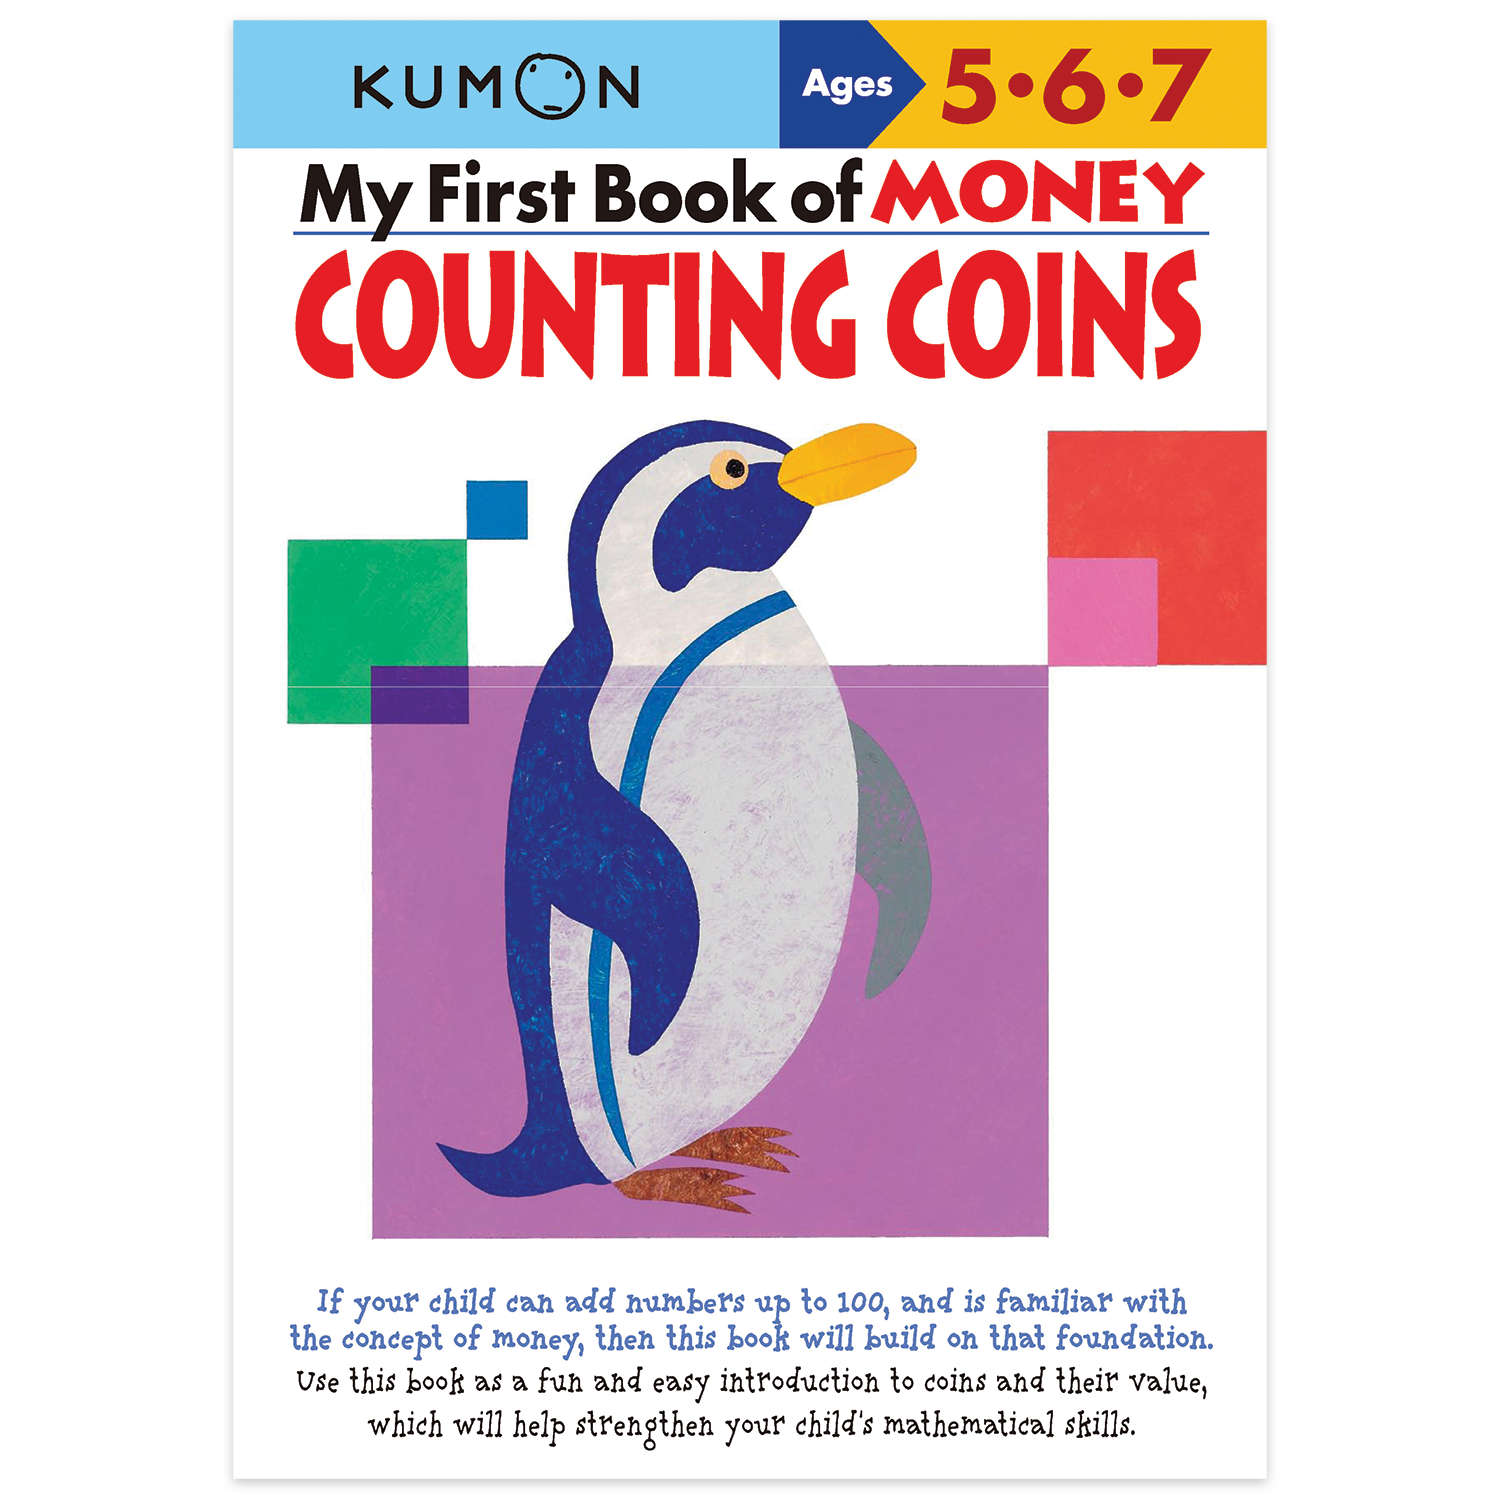 my first book of money: counting coins